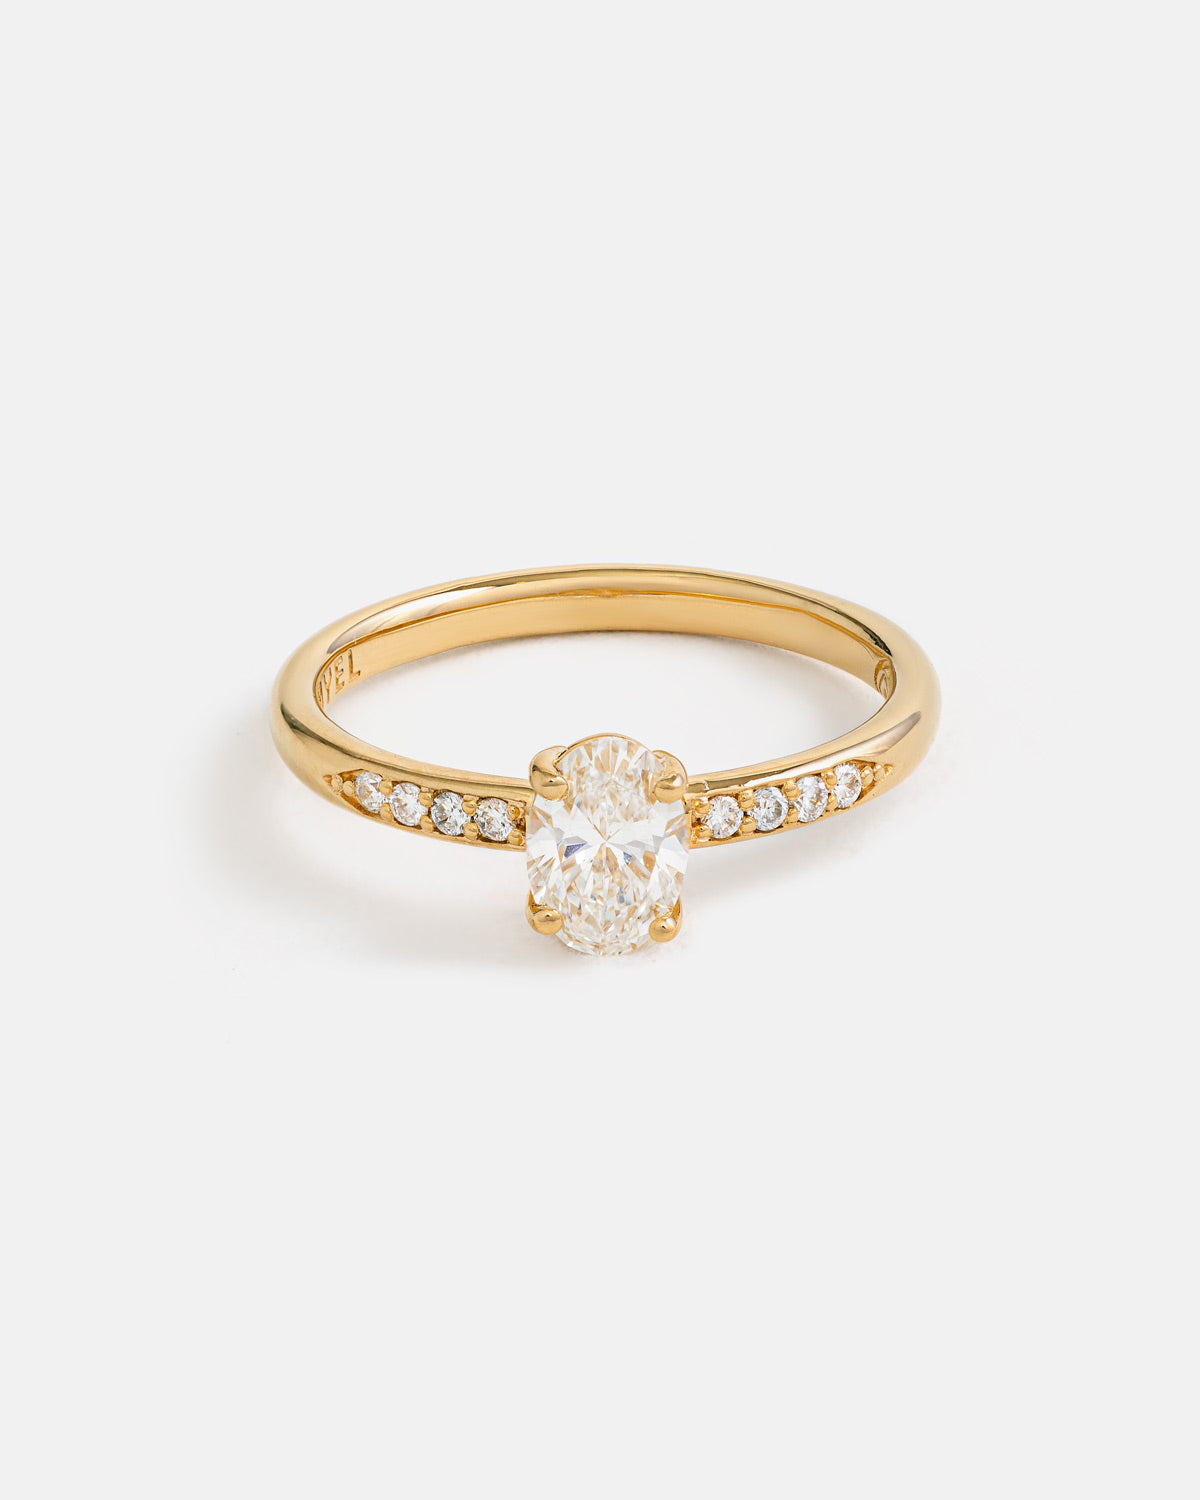 Ellipse Ring in Fairmined Yellow Gold with Diamonds